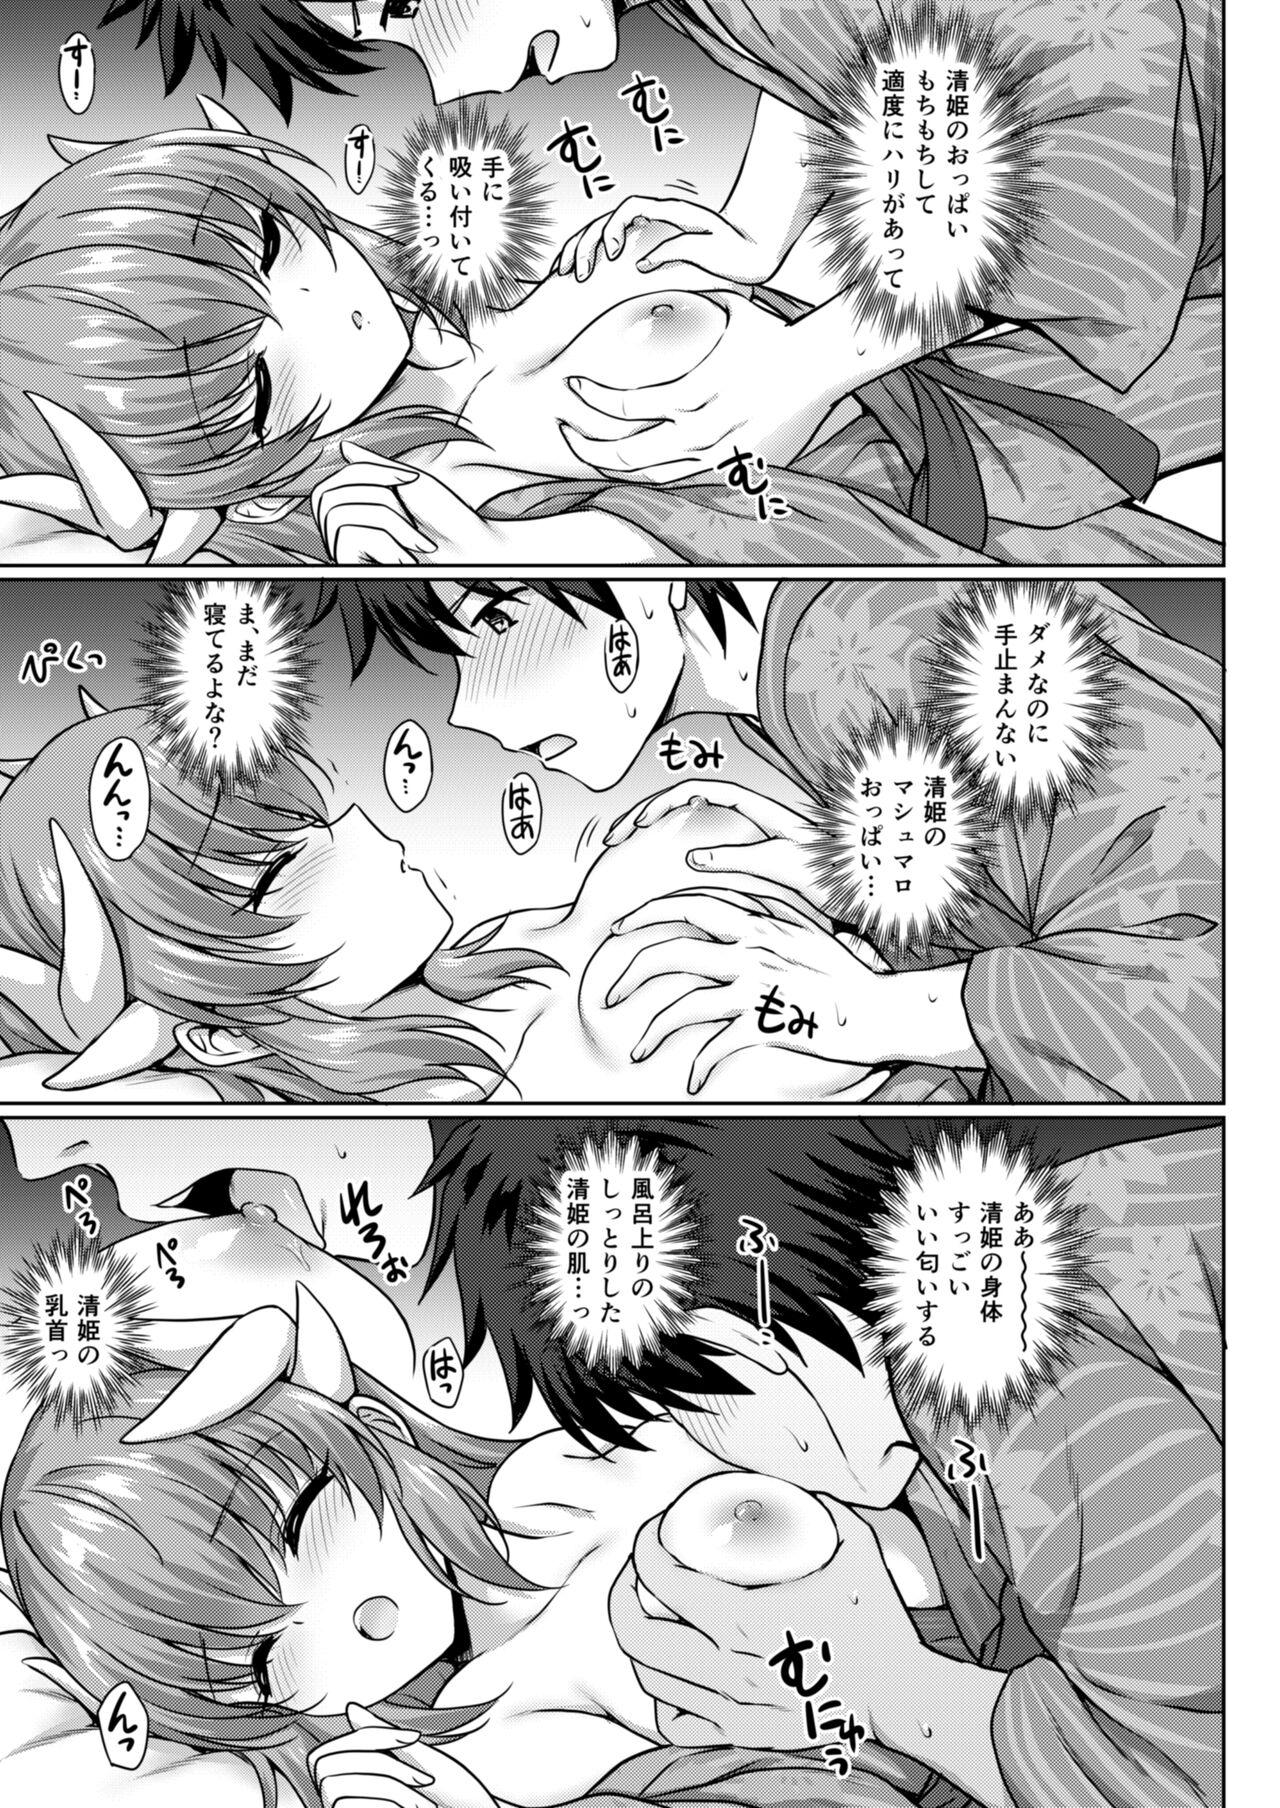 Women Kiyohime Onsen - Fate grand order Roludo - Page 6